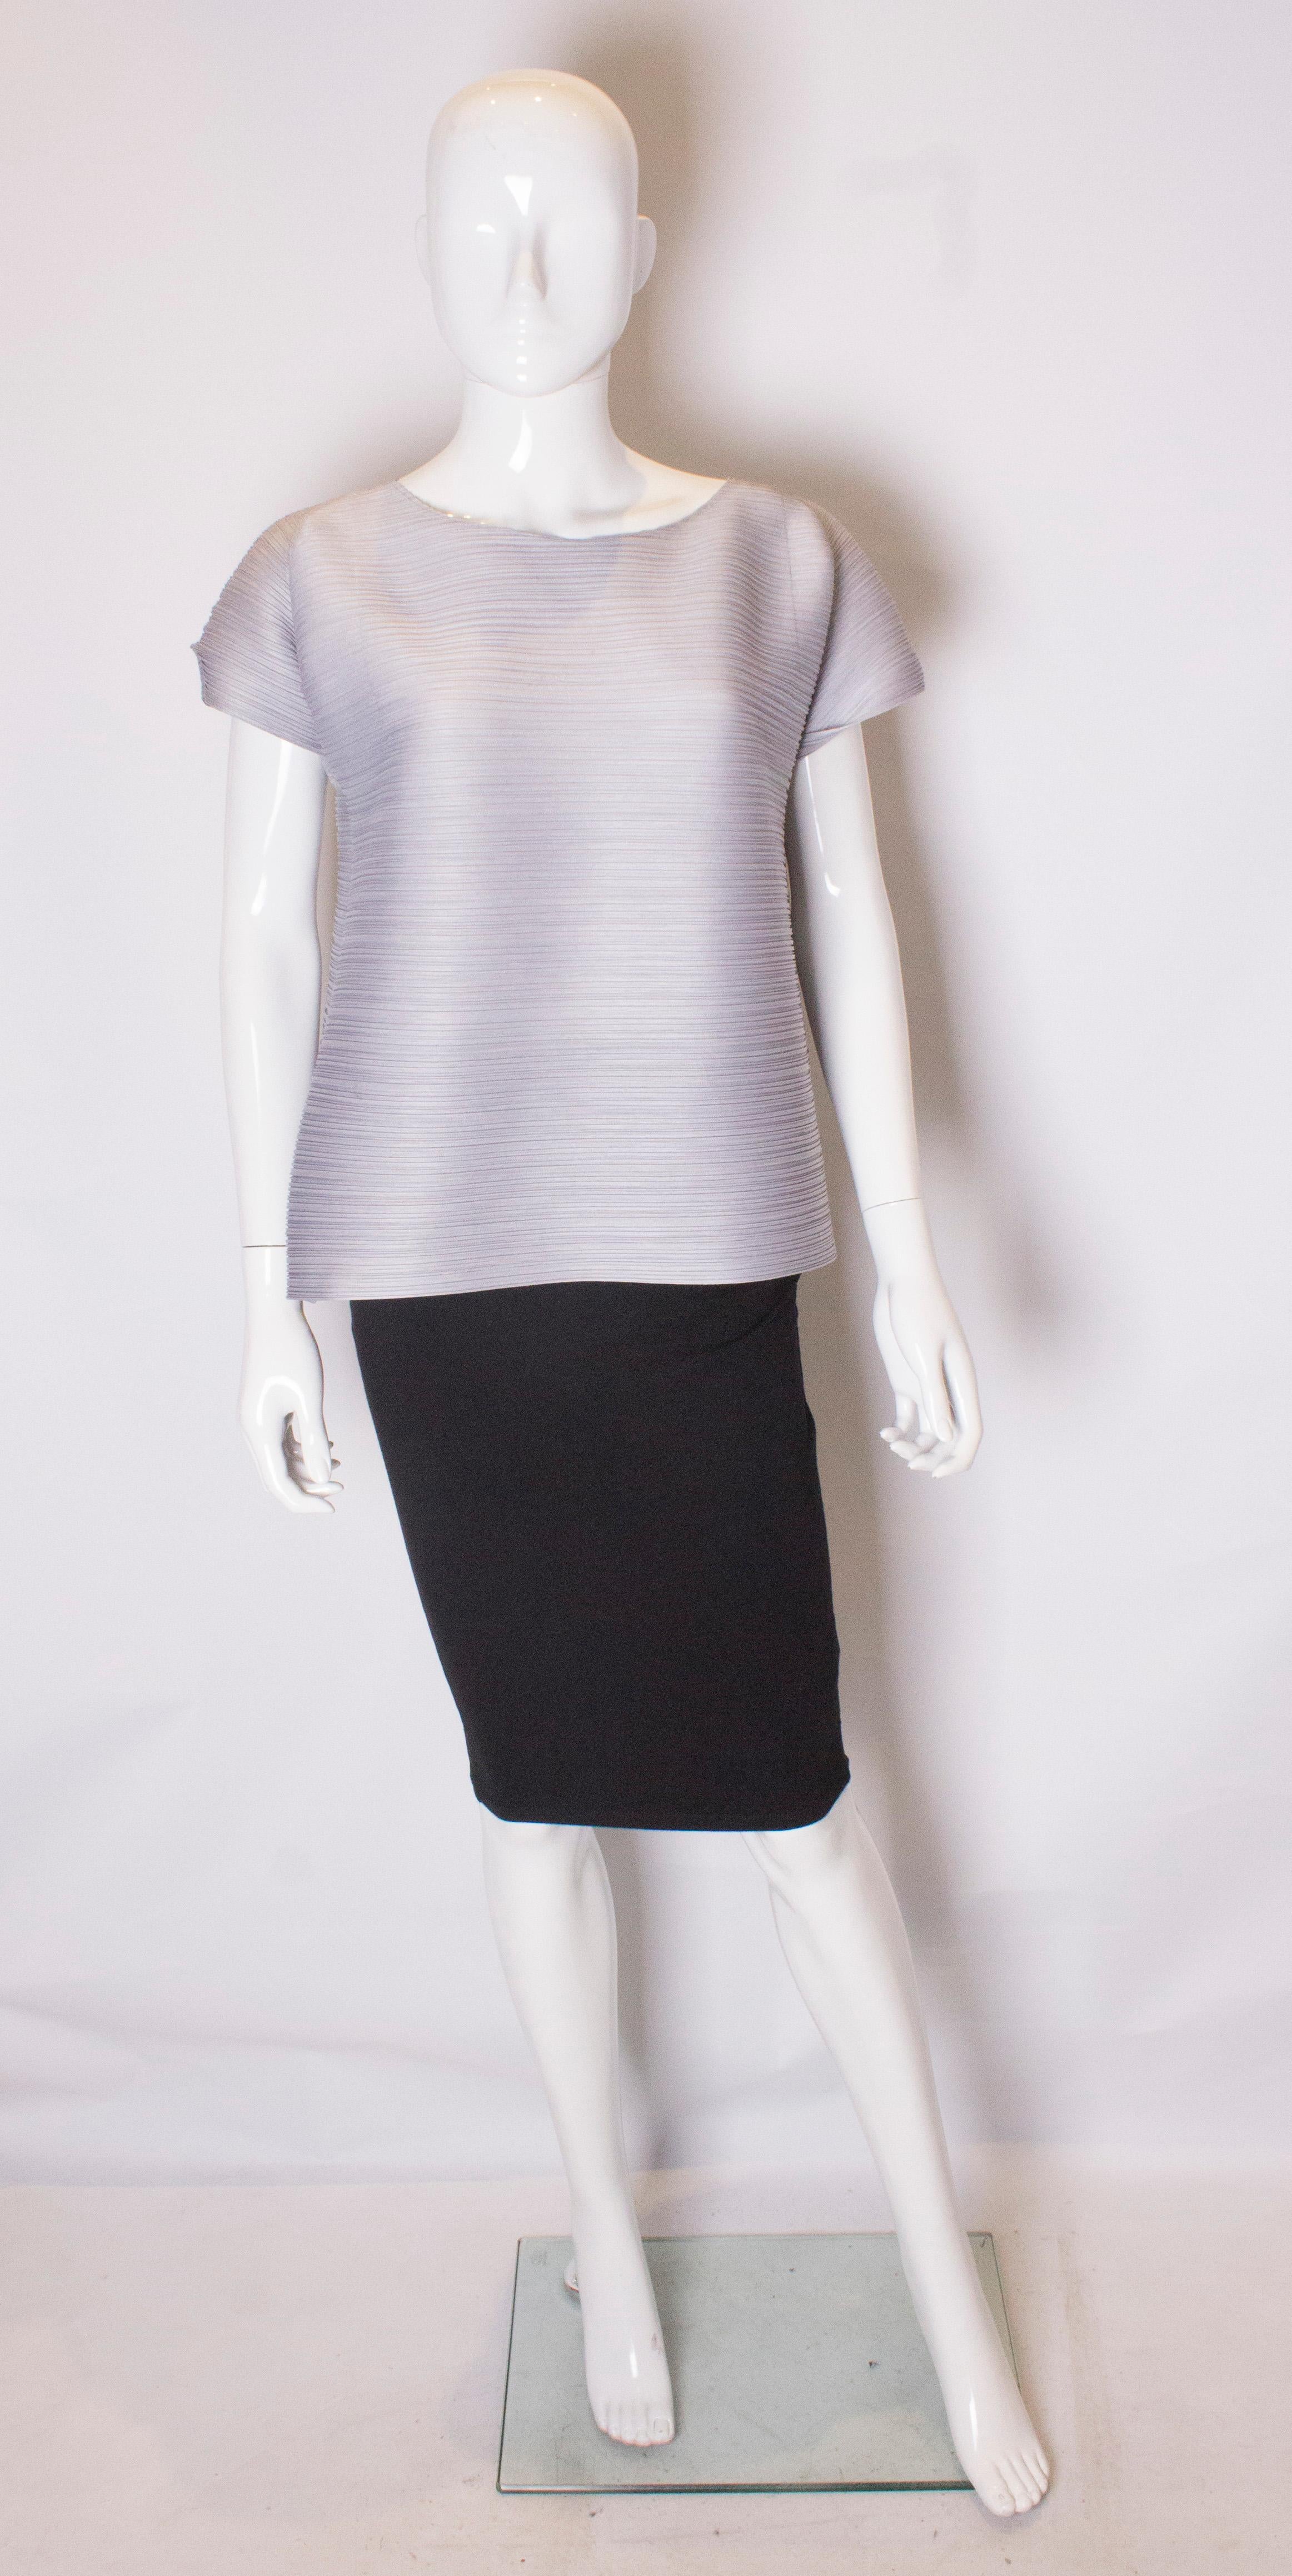 A great top by Issey Miyake, Pleats Please range. The top is in a pretty dove grey colour and has a round neck and cap like sleaves.